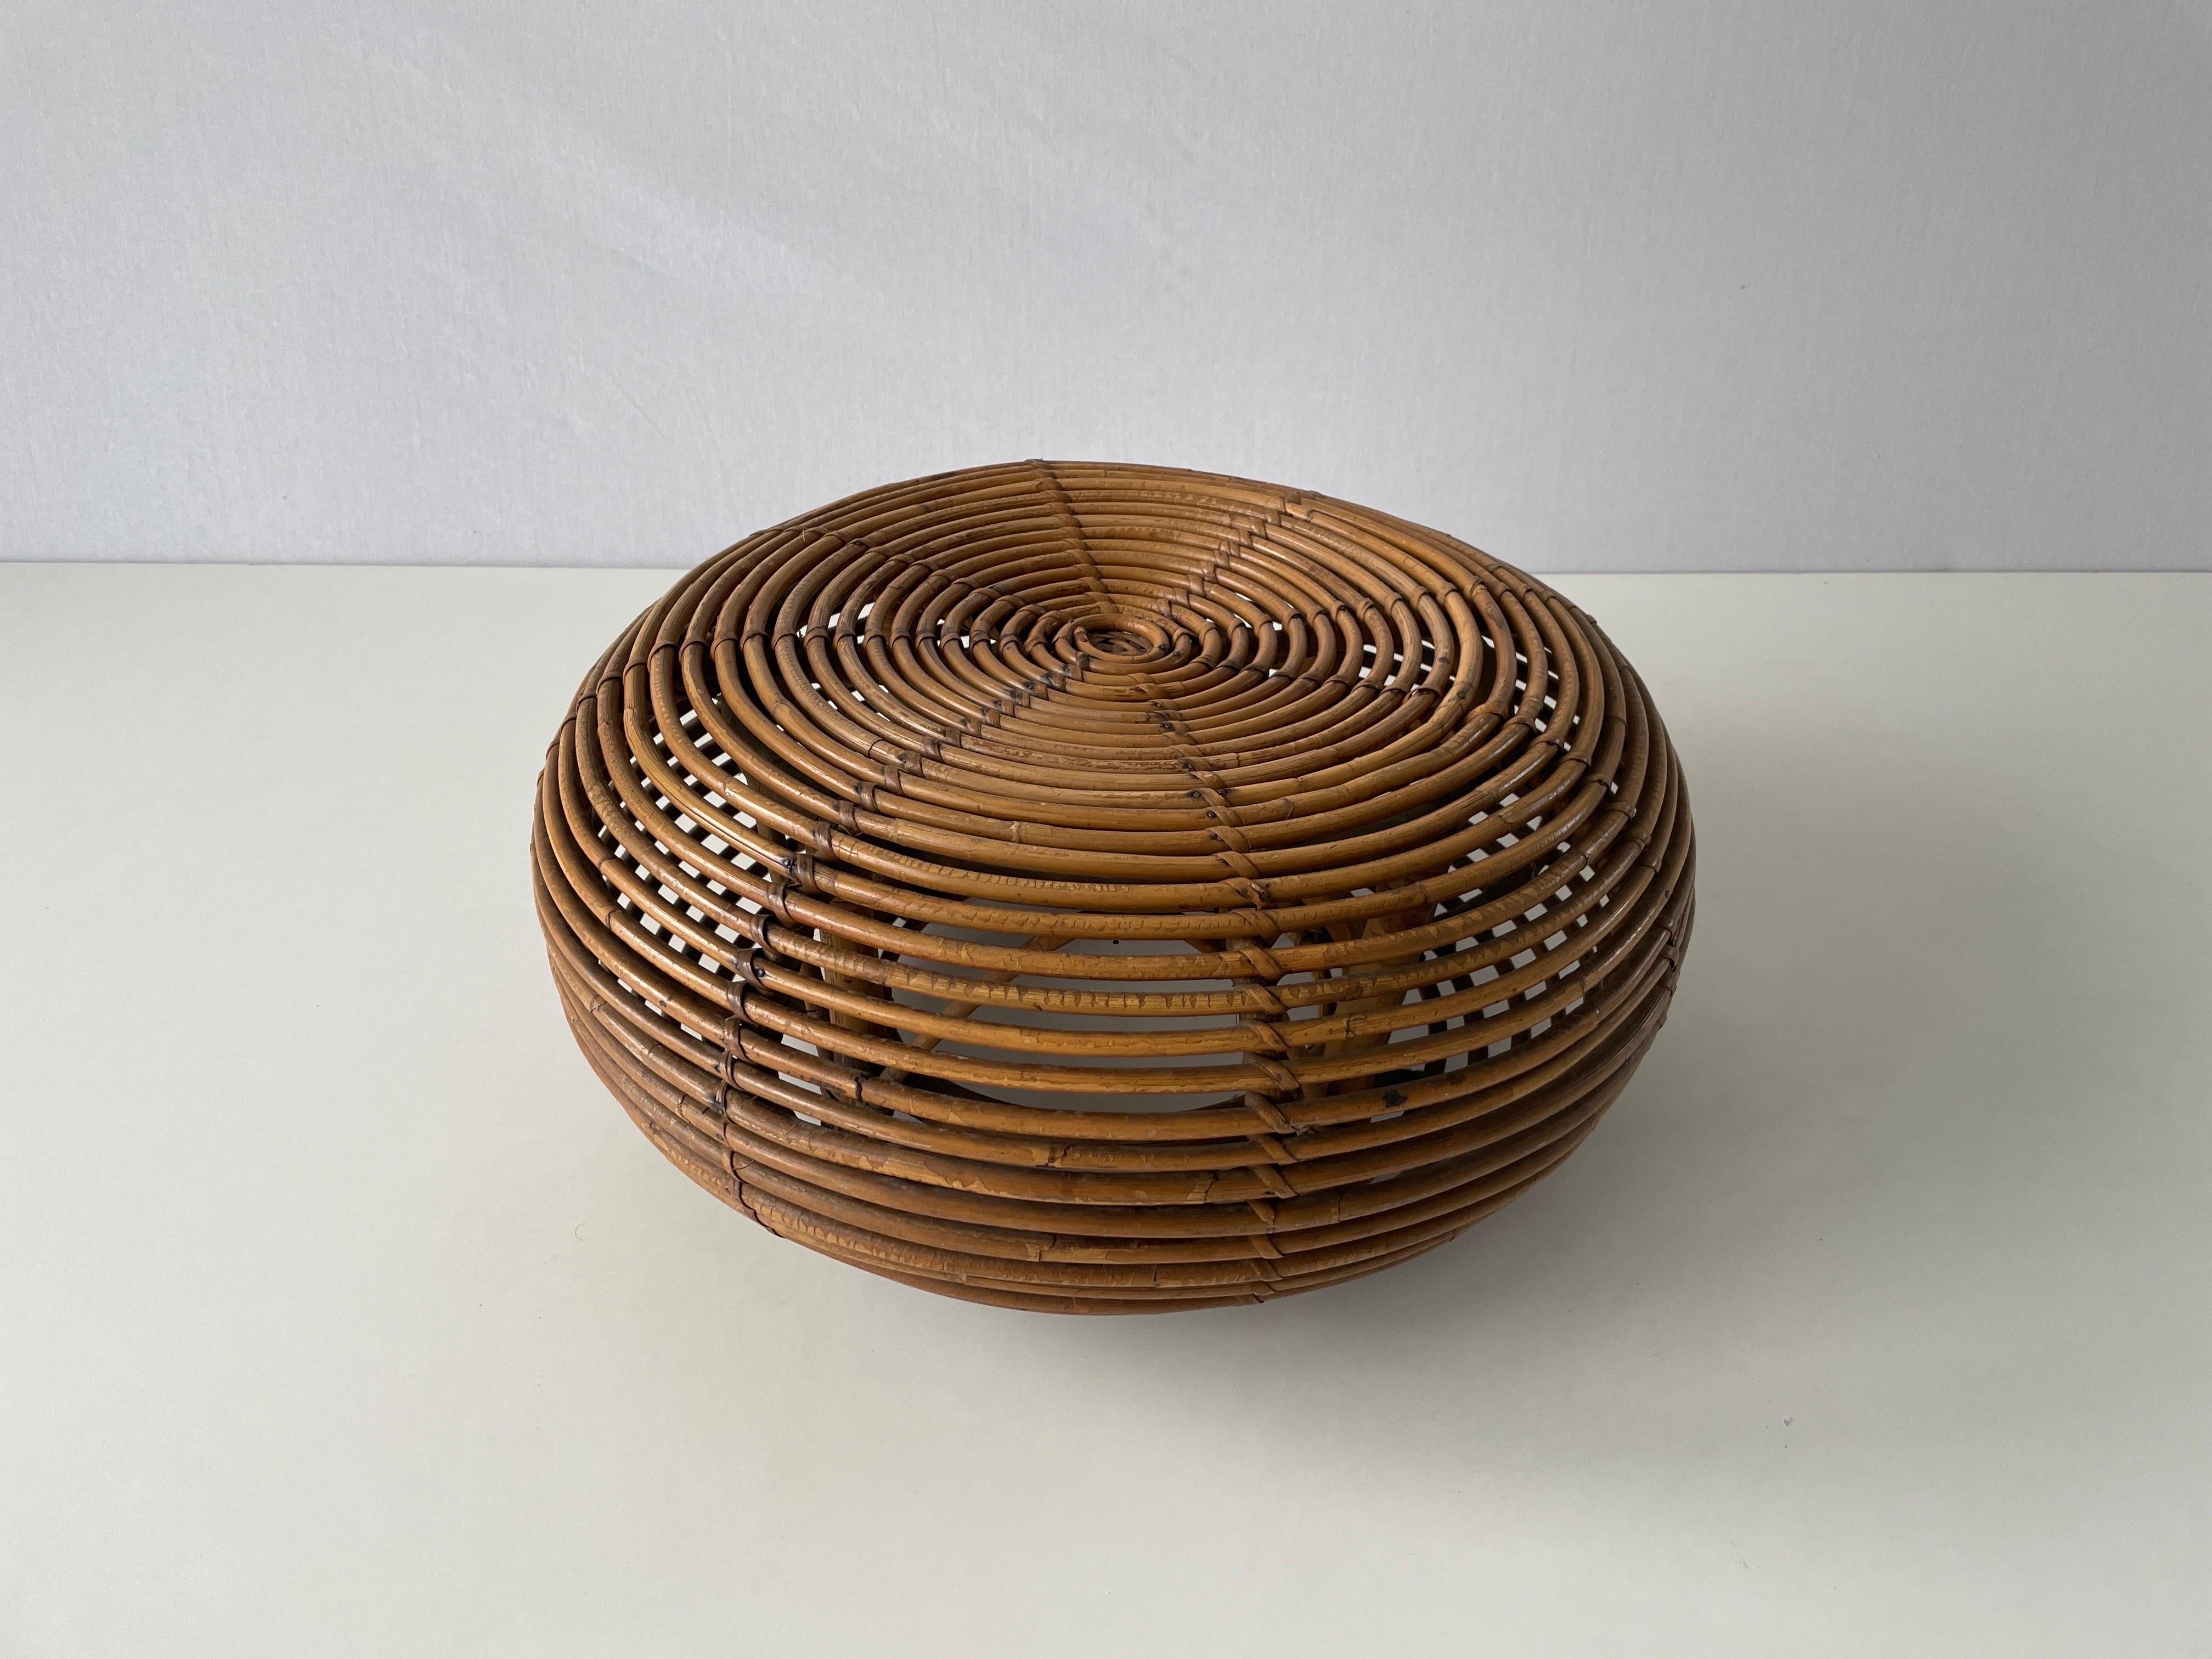 Mid-century Modern Round Bamboo Pouf, 1960s, Italy

Measurements :

Diameter: 55 cm
Height: 26 cm

Please do not hesitate to ask us if you have any questions.